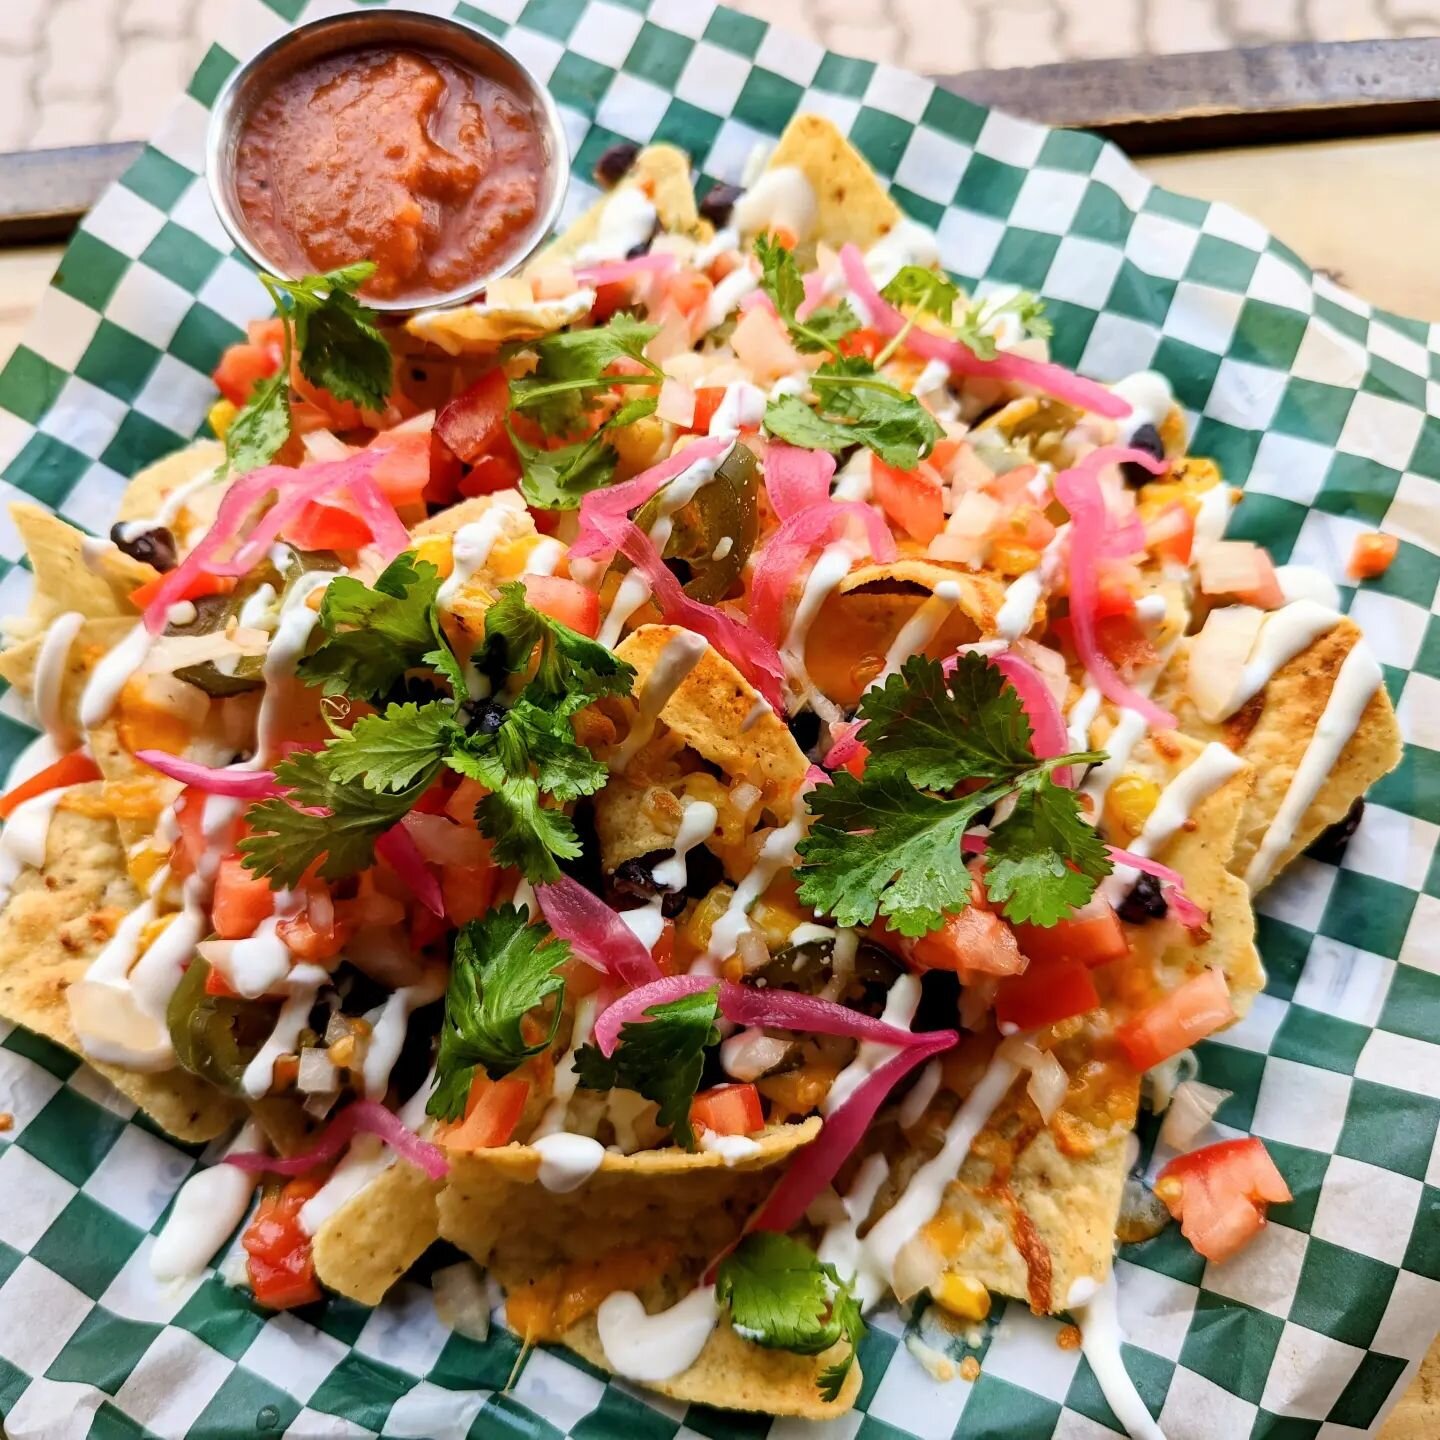 Nachos today! 

Open til 1 am

Food service ends at 10 but we have some snacks available for late night now!